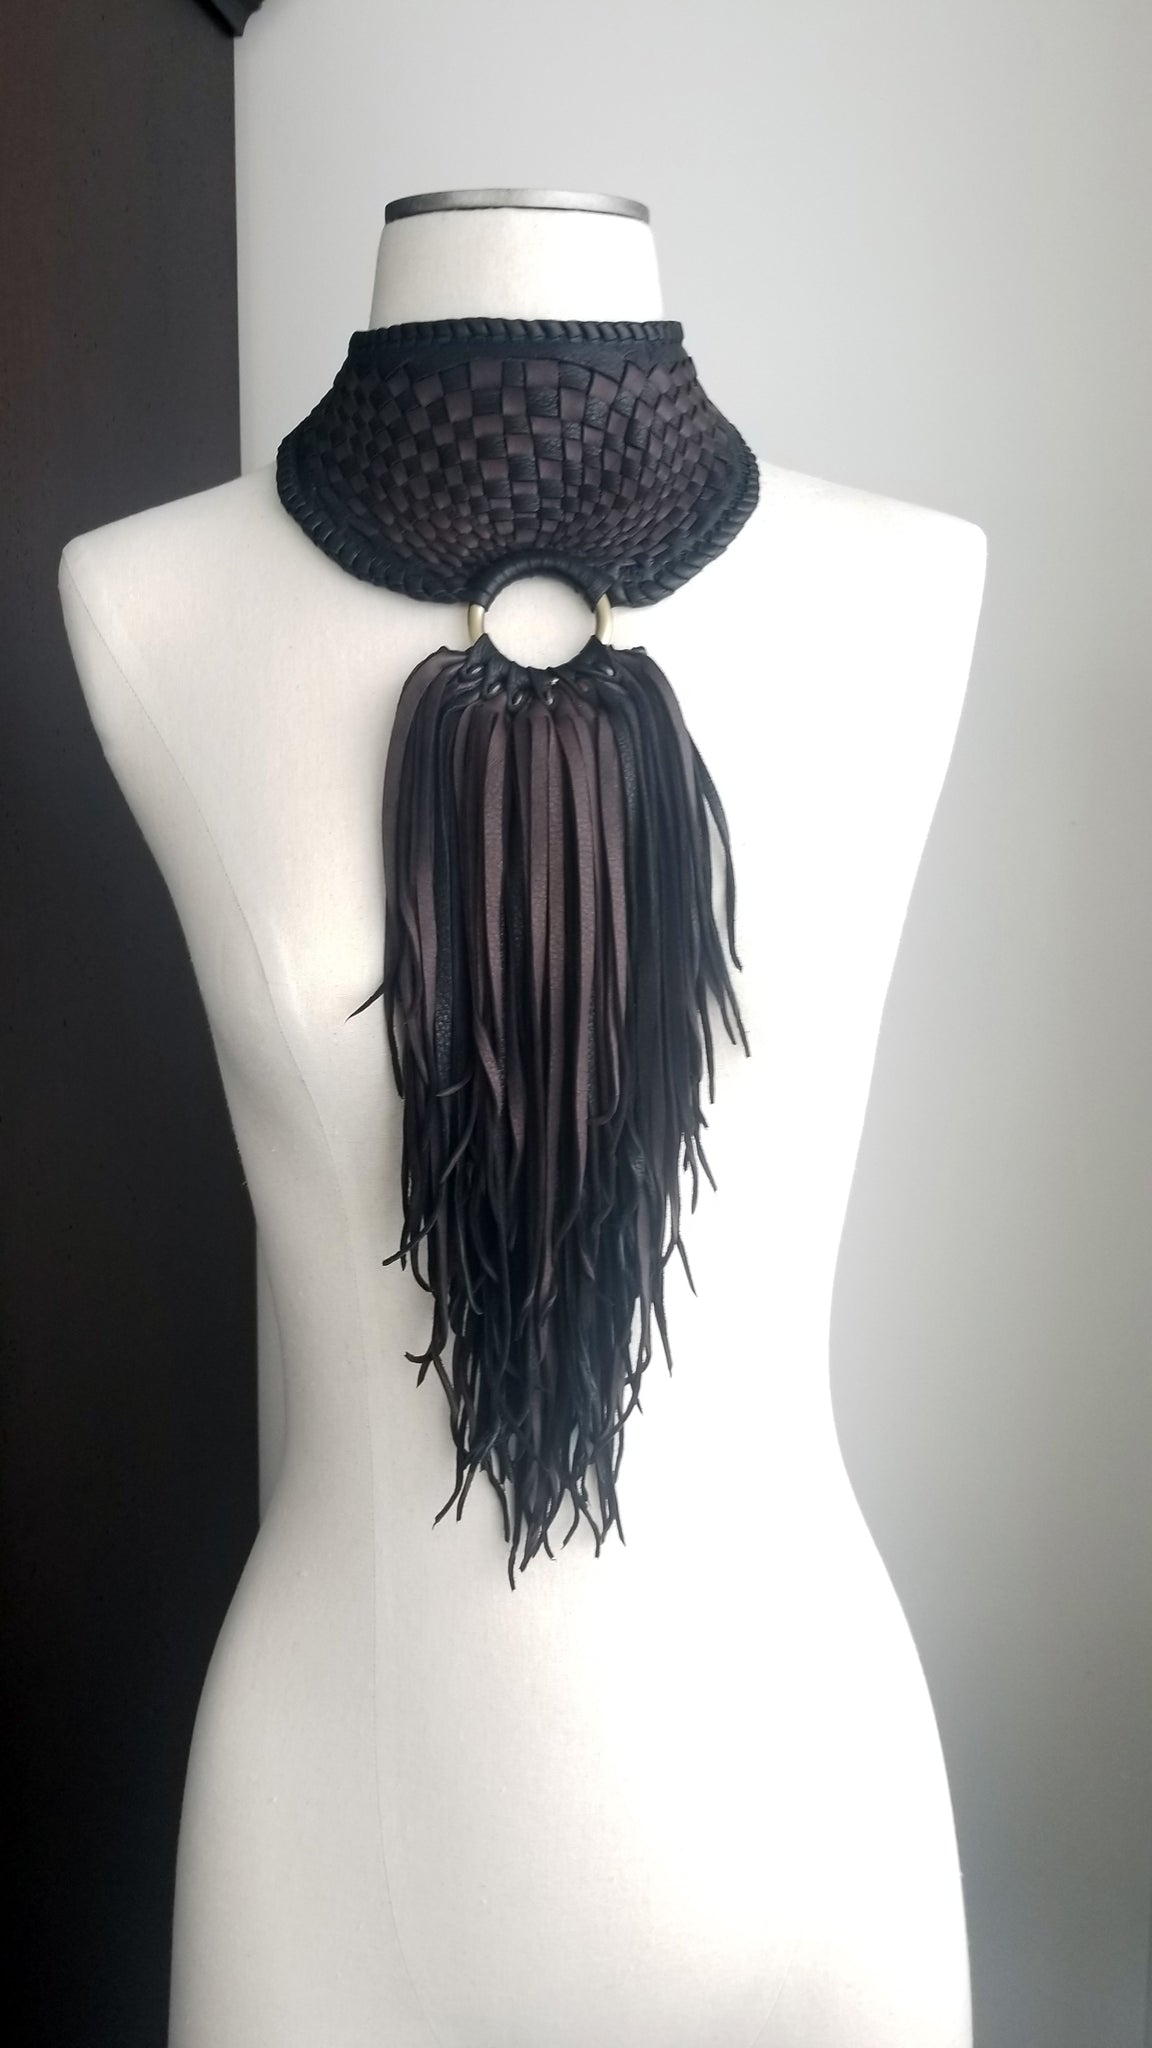 Zanta African Inspired, Braided Leather Statement Necklace, Bib Neckpiece, woven collar, fringe and tassels, on a dress form form